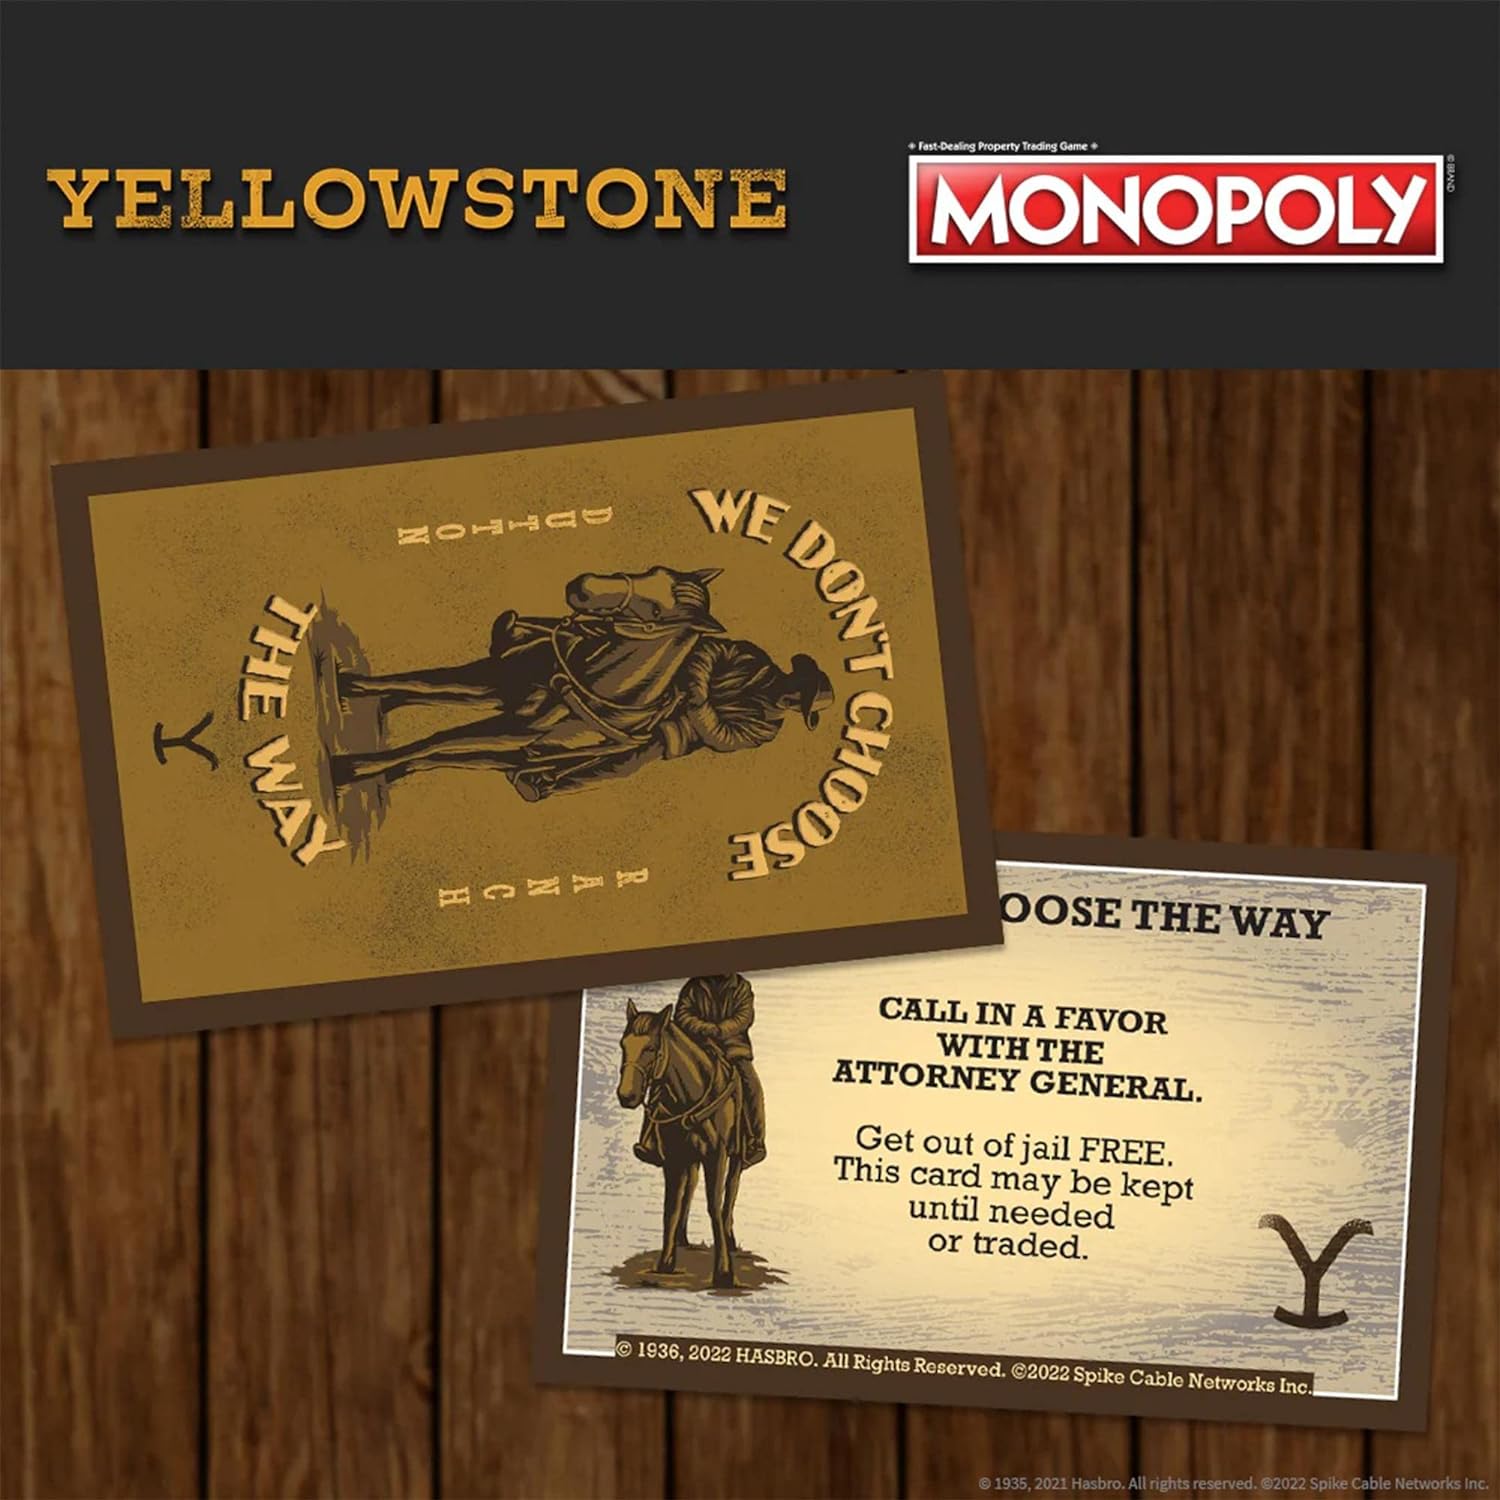 Monopoly: Yellowstone | Buy, Sell, Trade Spaces Featuring Locations from The Paramount Network Show | Collectible Classic Monopoly Game | Officially-Licensed, Yellowstone Game & Merchandise, 6 players